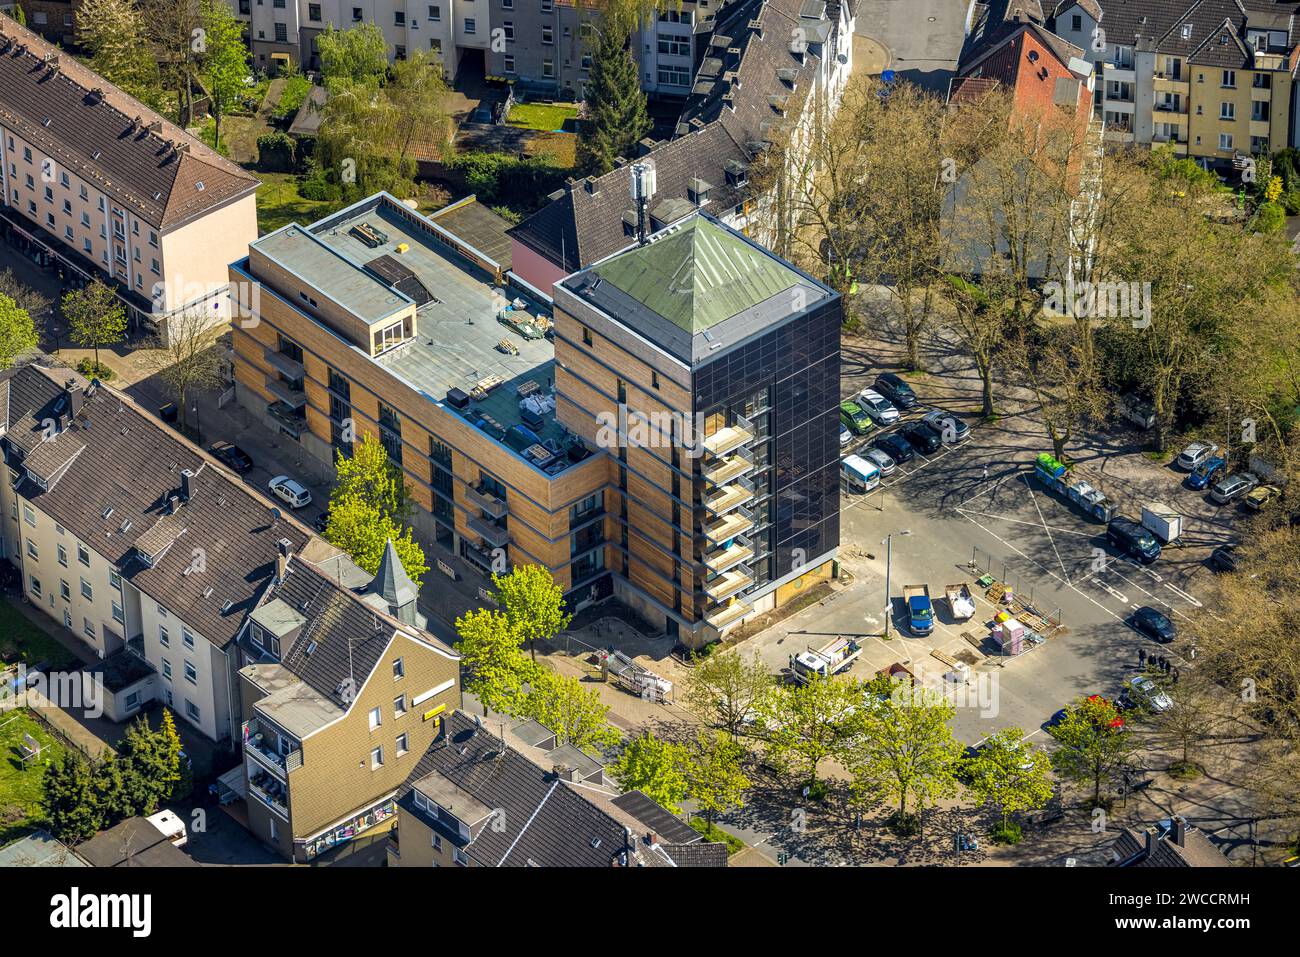 Aerial view, construction site with new we-house Herne residential complex, Mont-Cenis bunker, Sodingen, Herne, Ruhr area, North Rhine-Westphalia, Ger Stock Photo